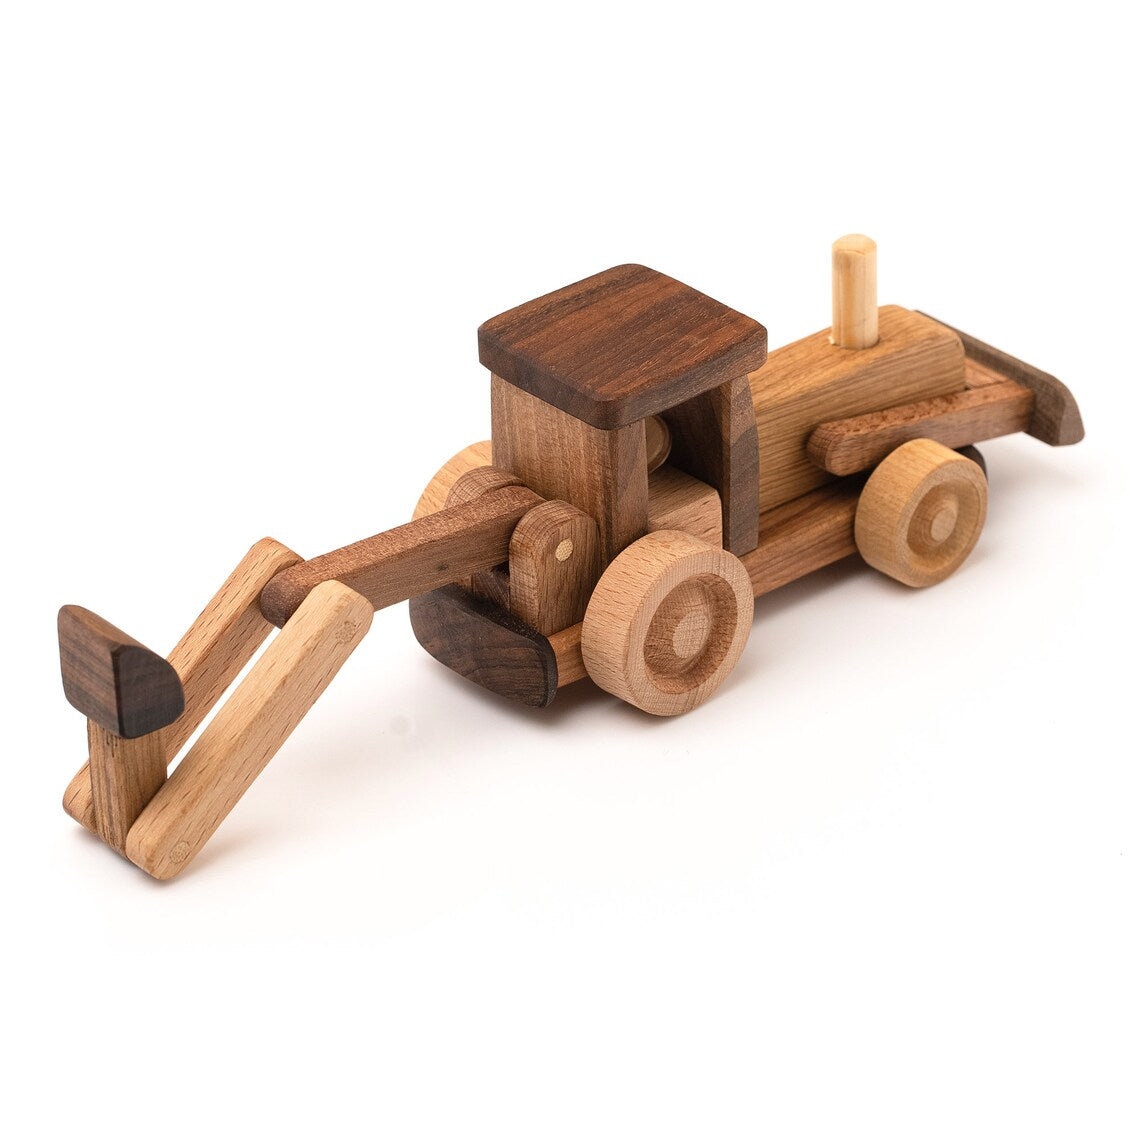 Wooden Tractor Toy For Kids